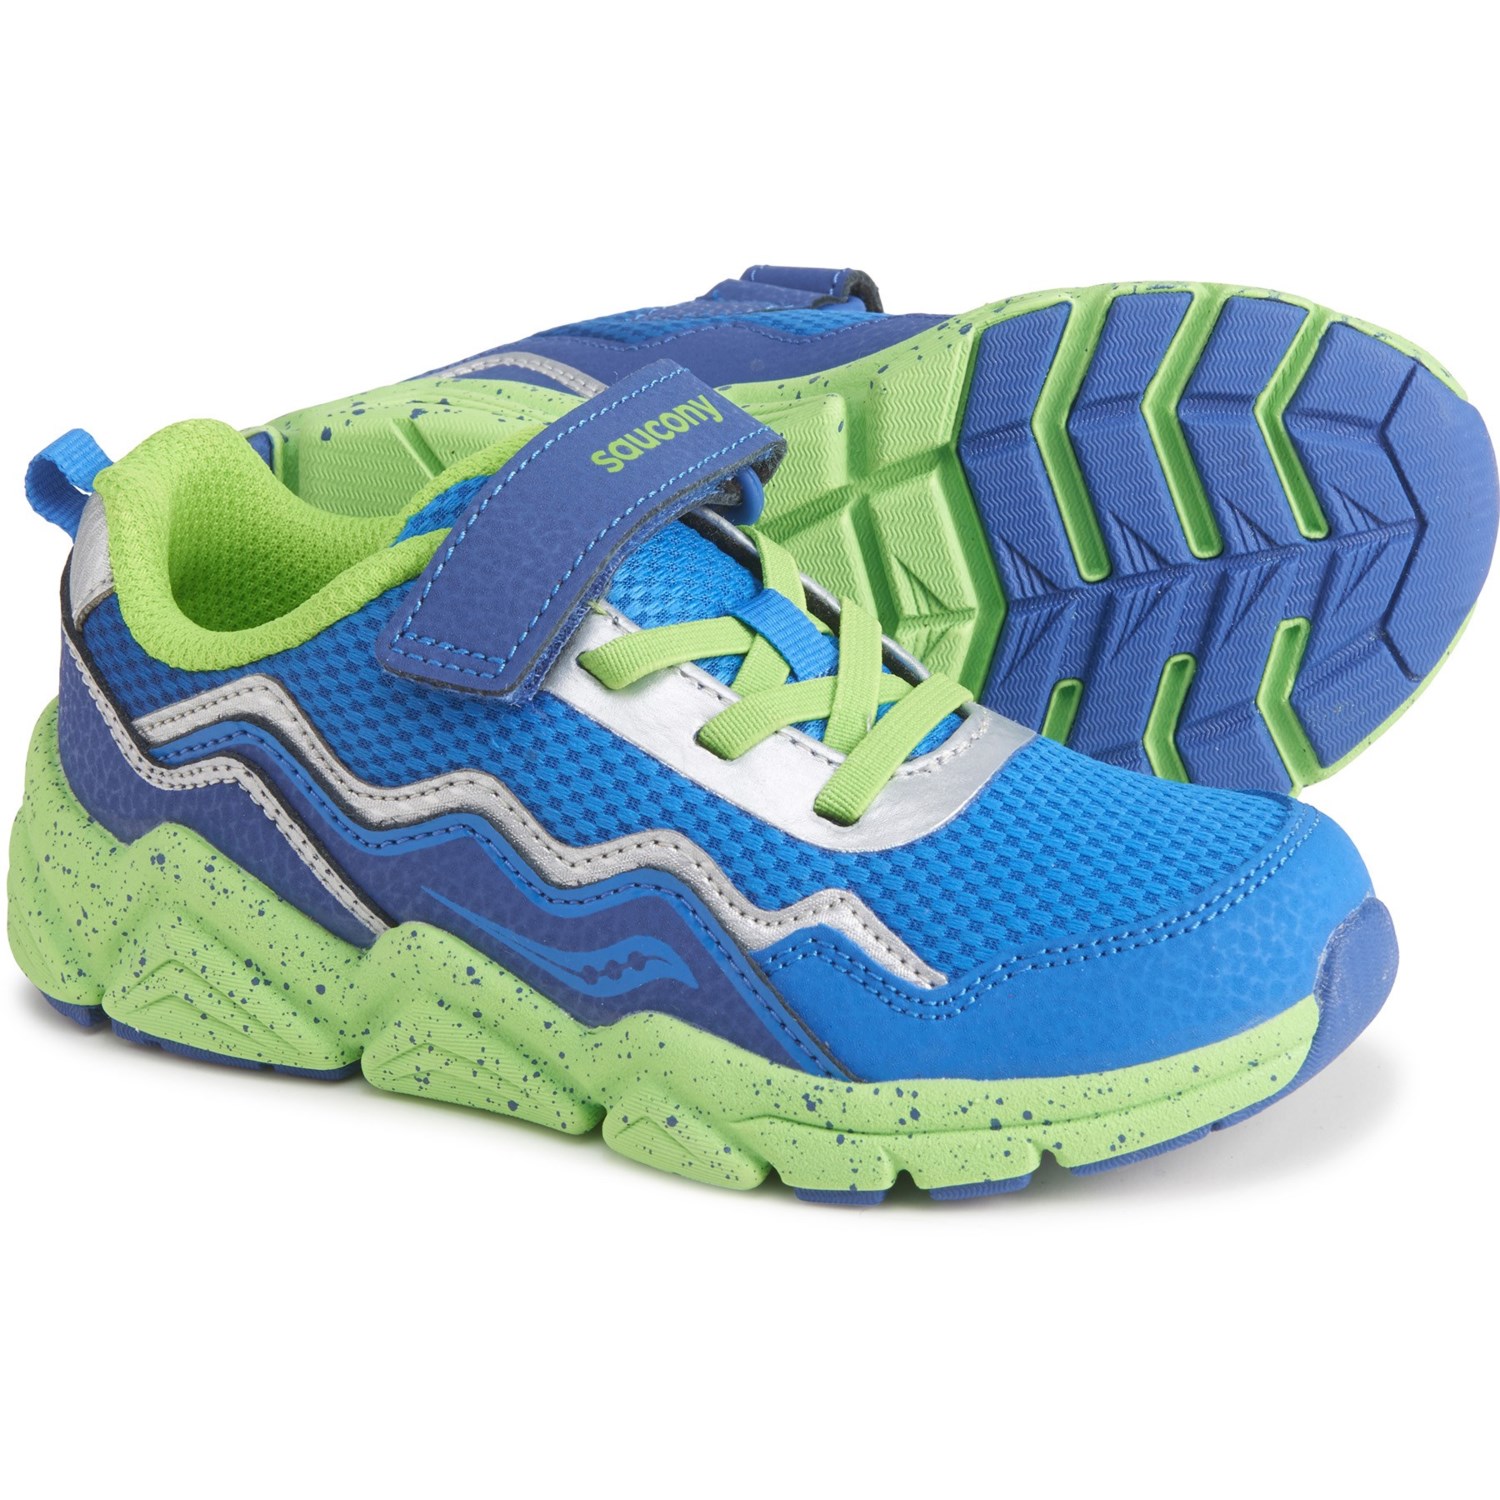 Saucony Flash 2.0 Running Shoes (For 